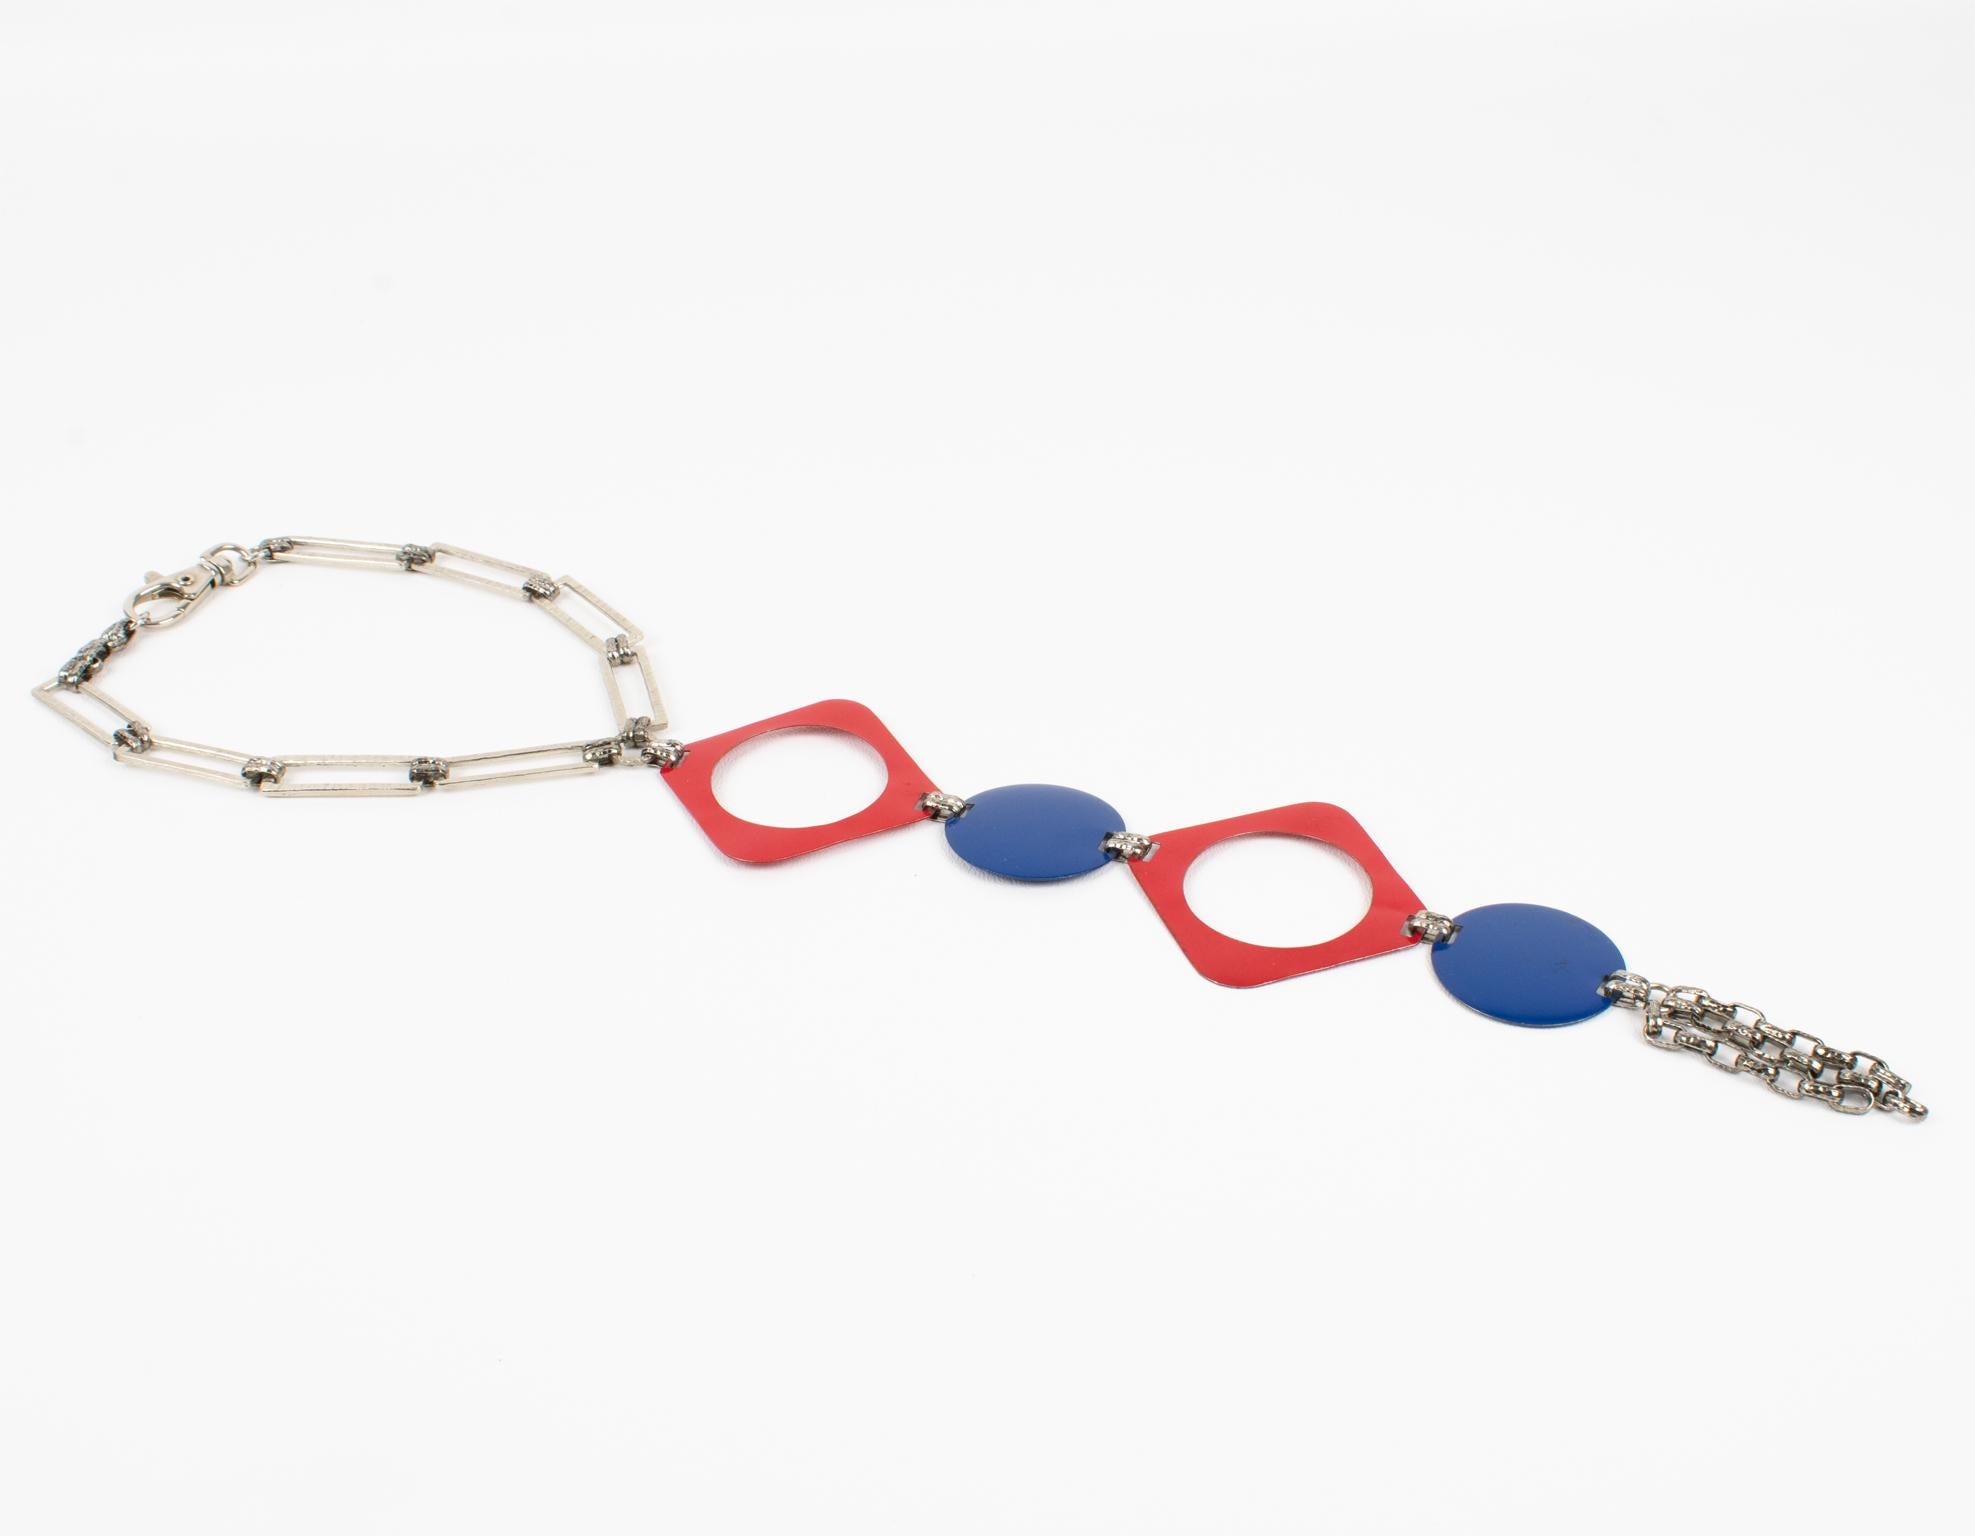 Space Age Paco Rabanne Style Collar Necklace with Blue and Red Enamel, 1960s For Sale 1